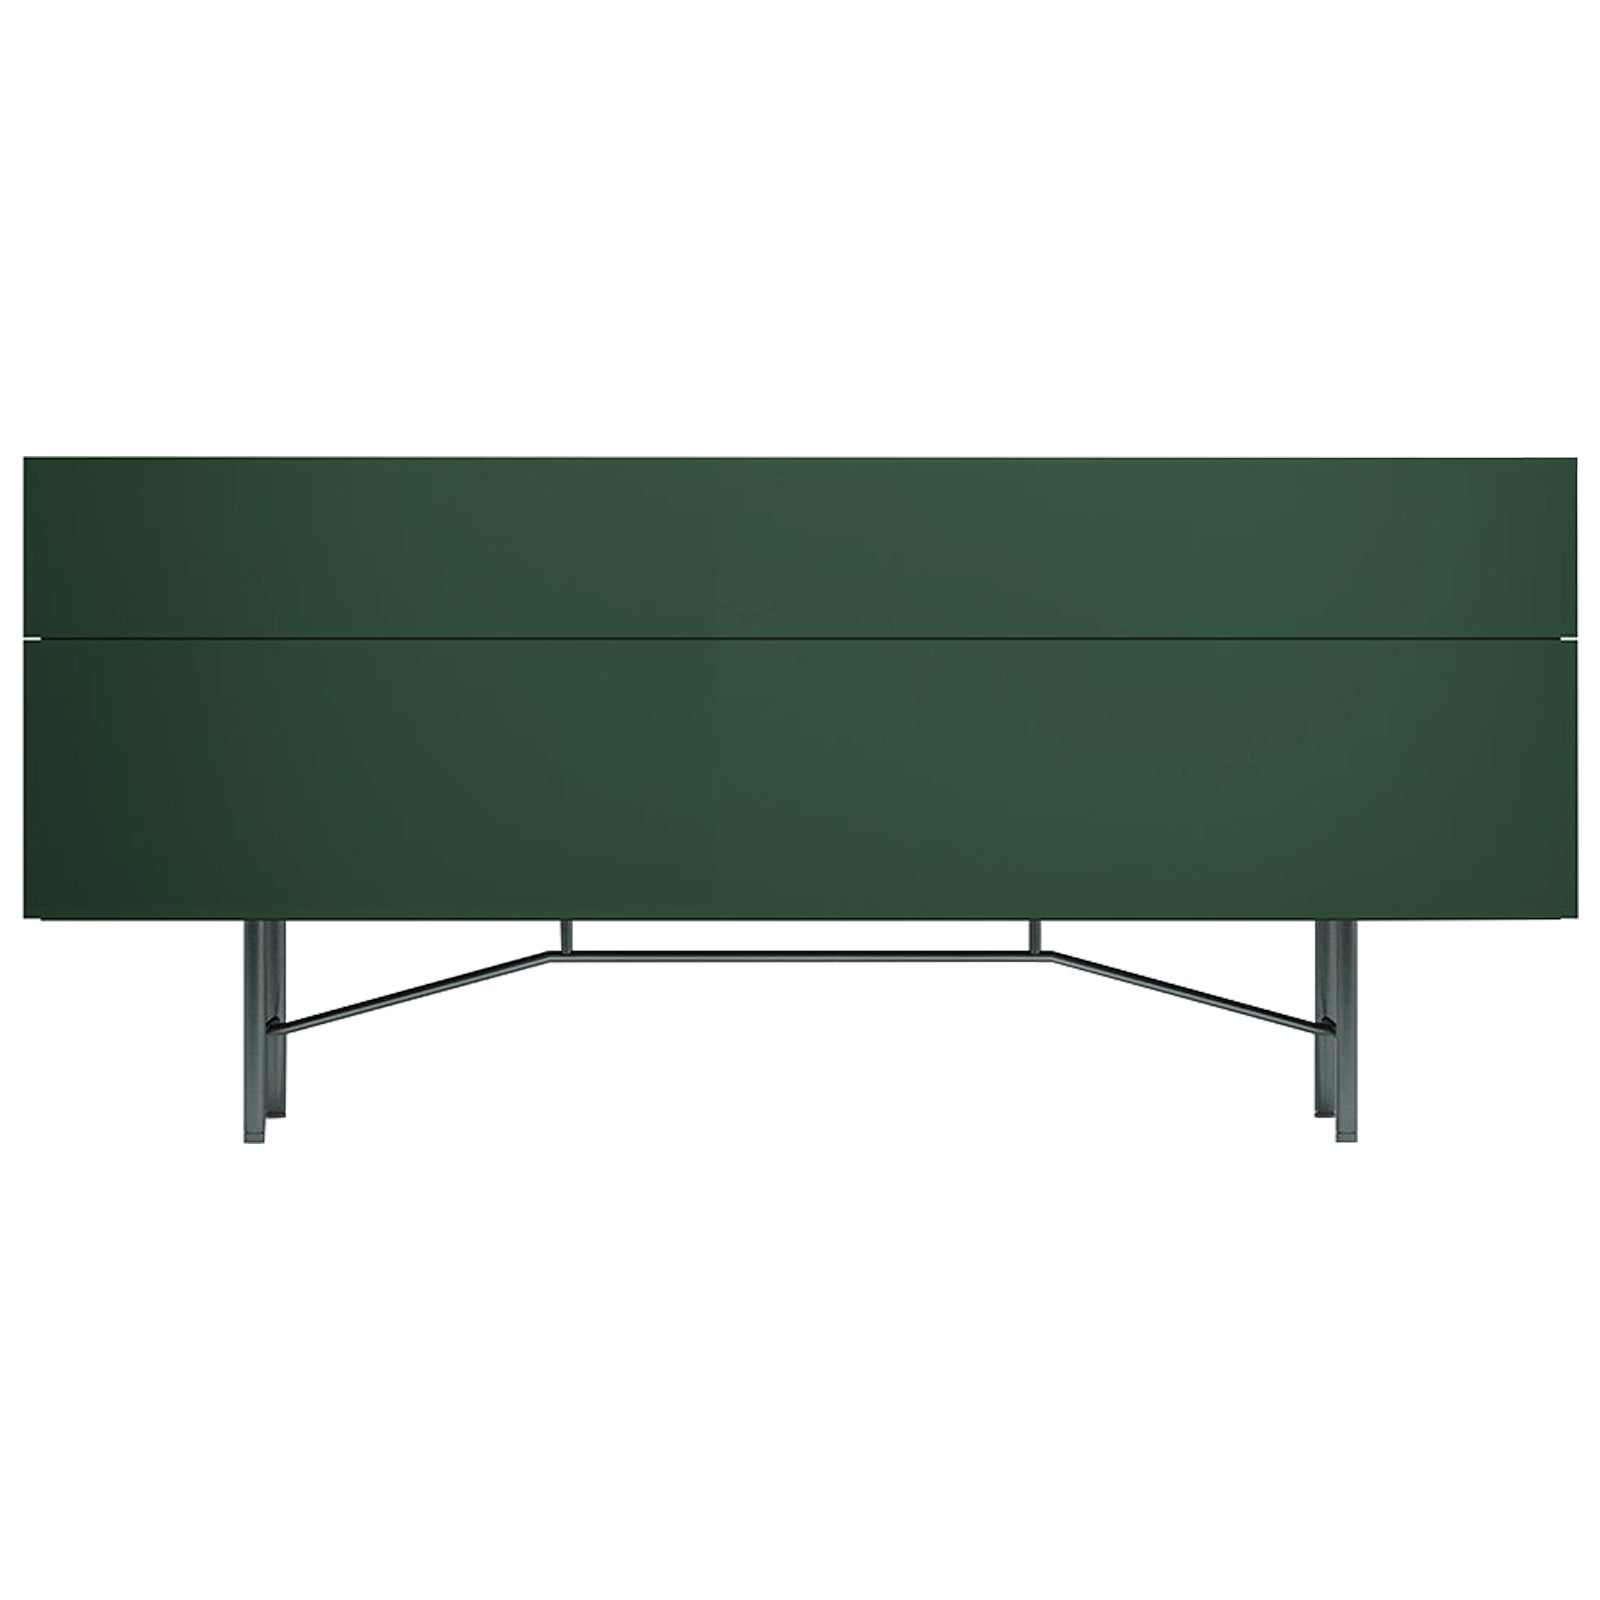 Acerbis Large Grand Buffet Sideboard in Glossy Lacquered Dark Green & Grey Frame